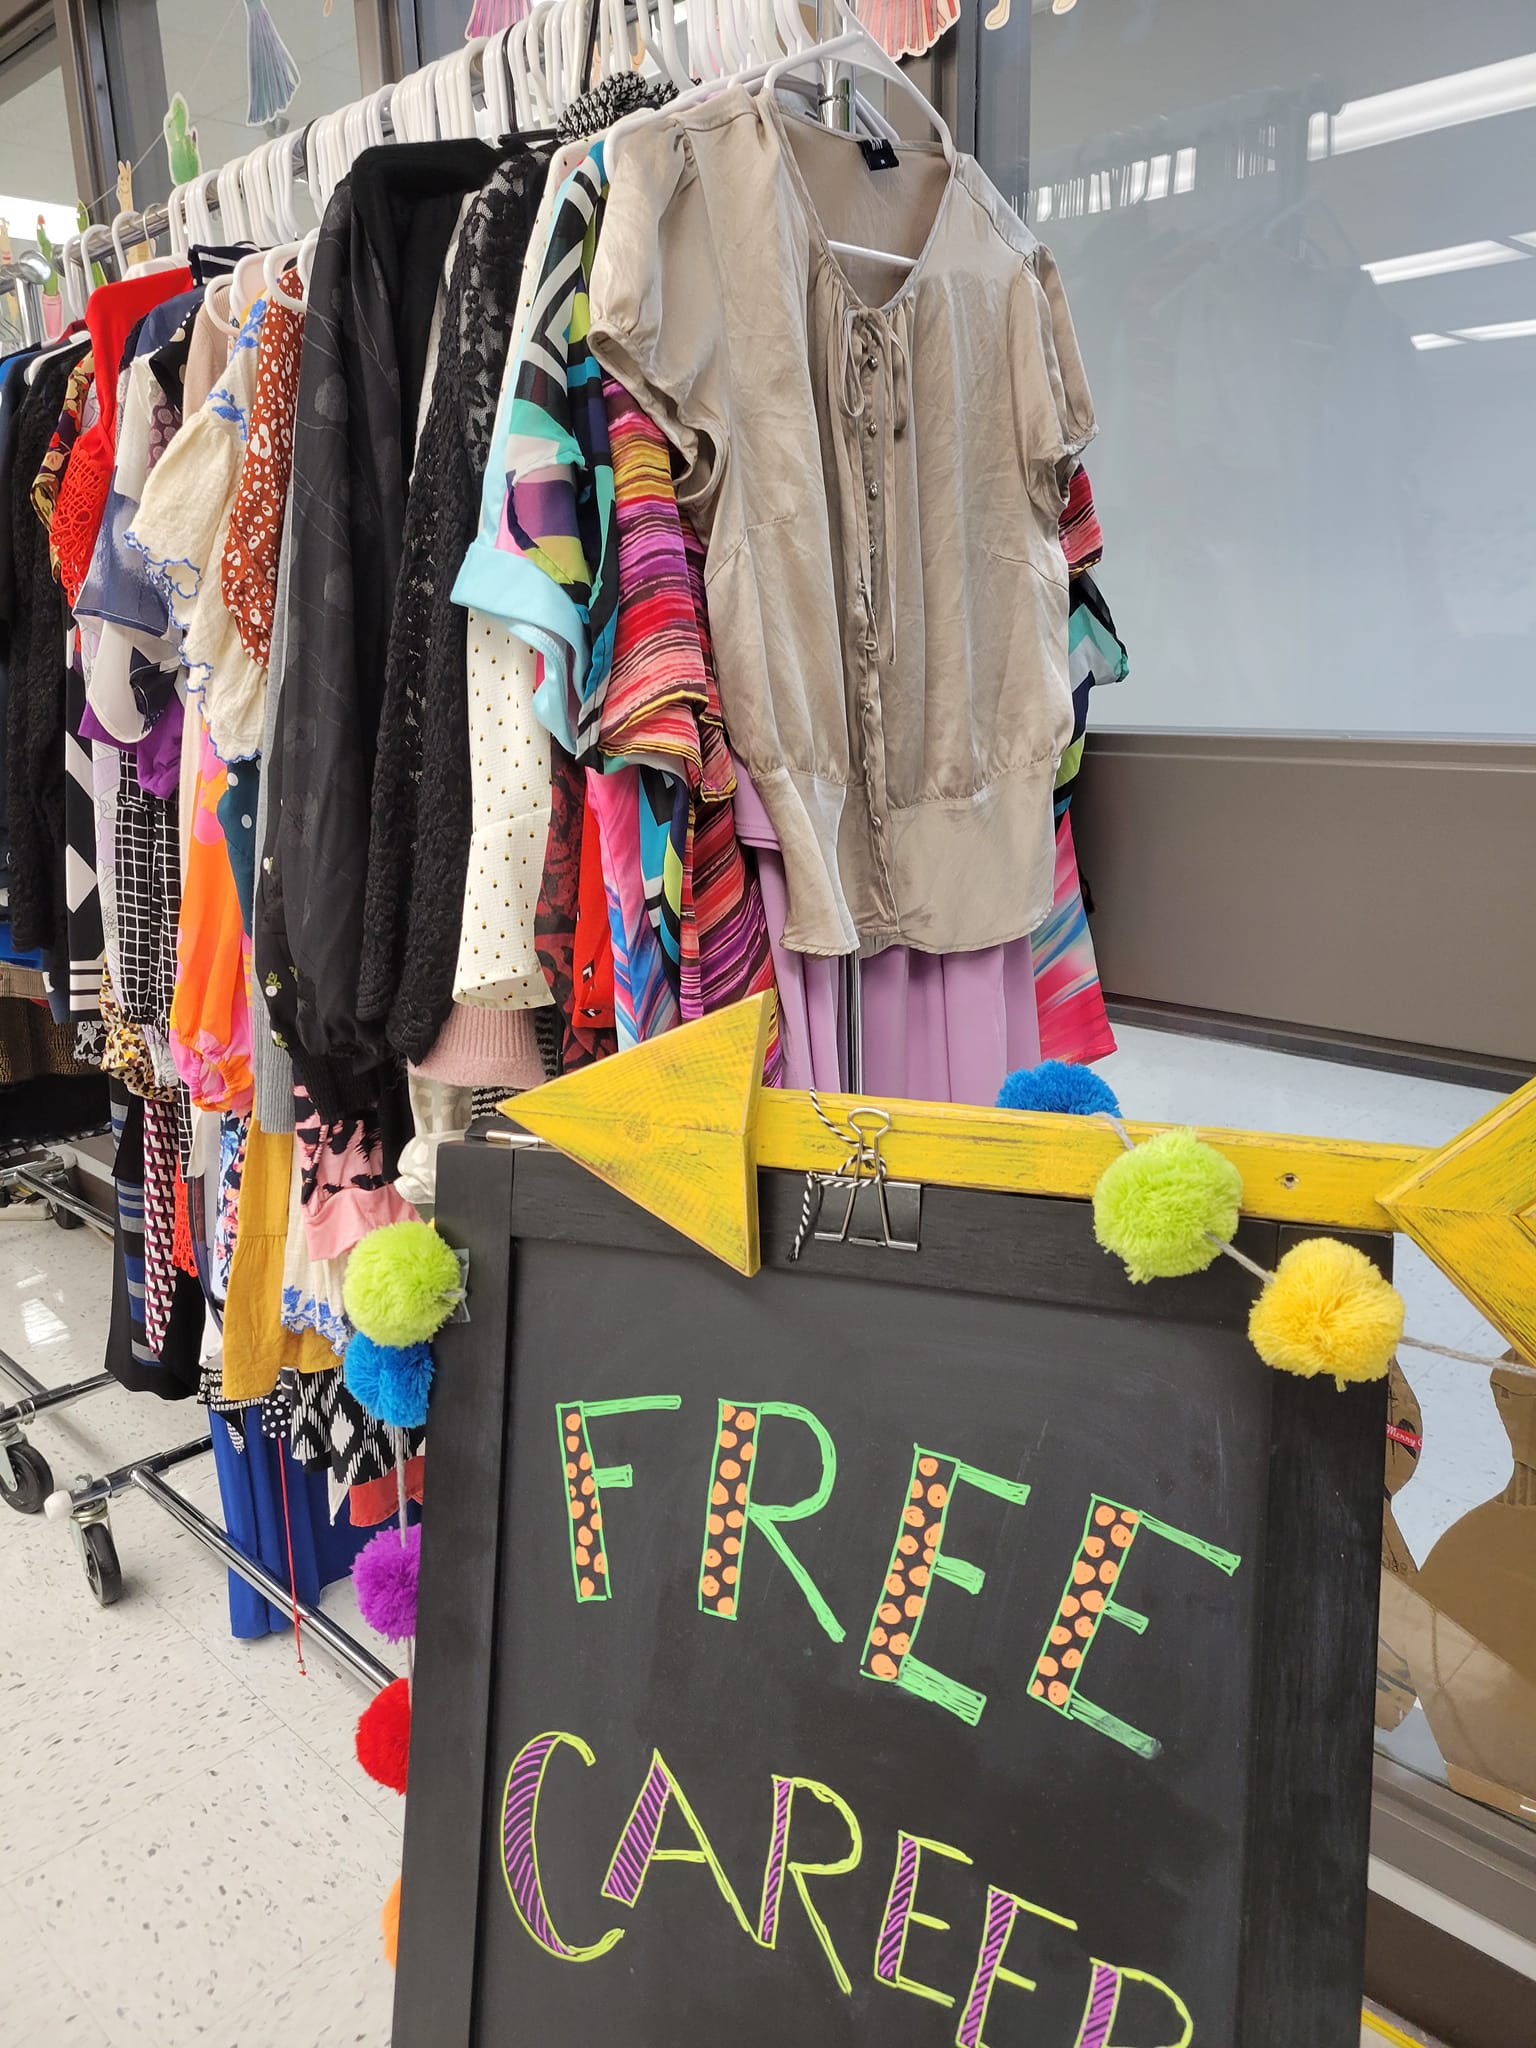 L&C’s Career Closet provides free professional clothing for students. The Career Closet is only one of the free services being offered to students at this month’s Career Readiness Day. Submitted photo